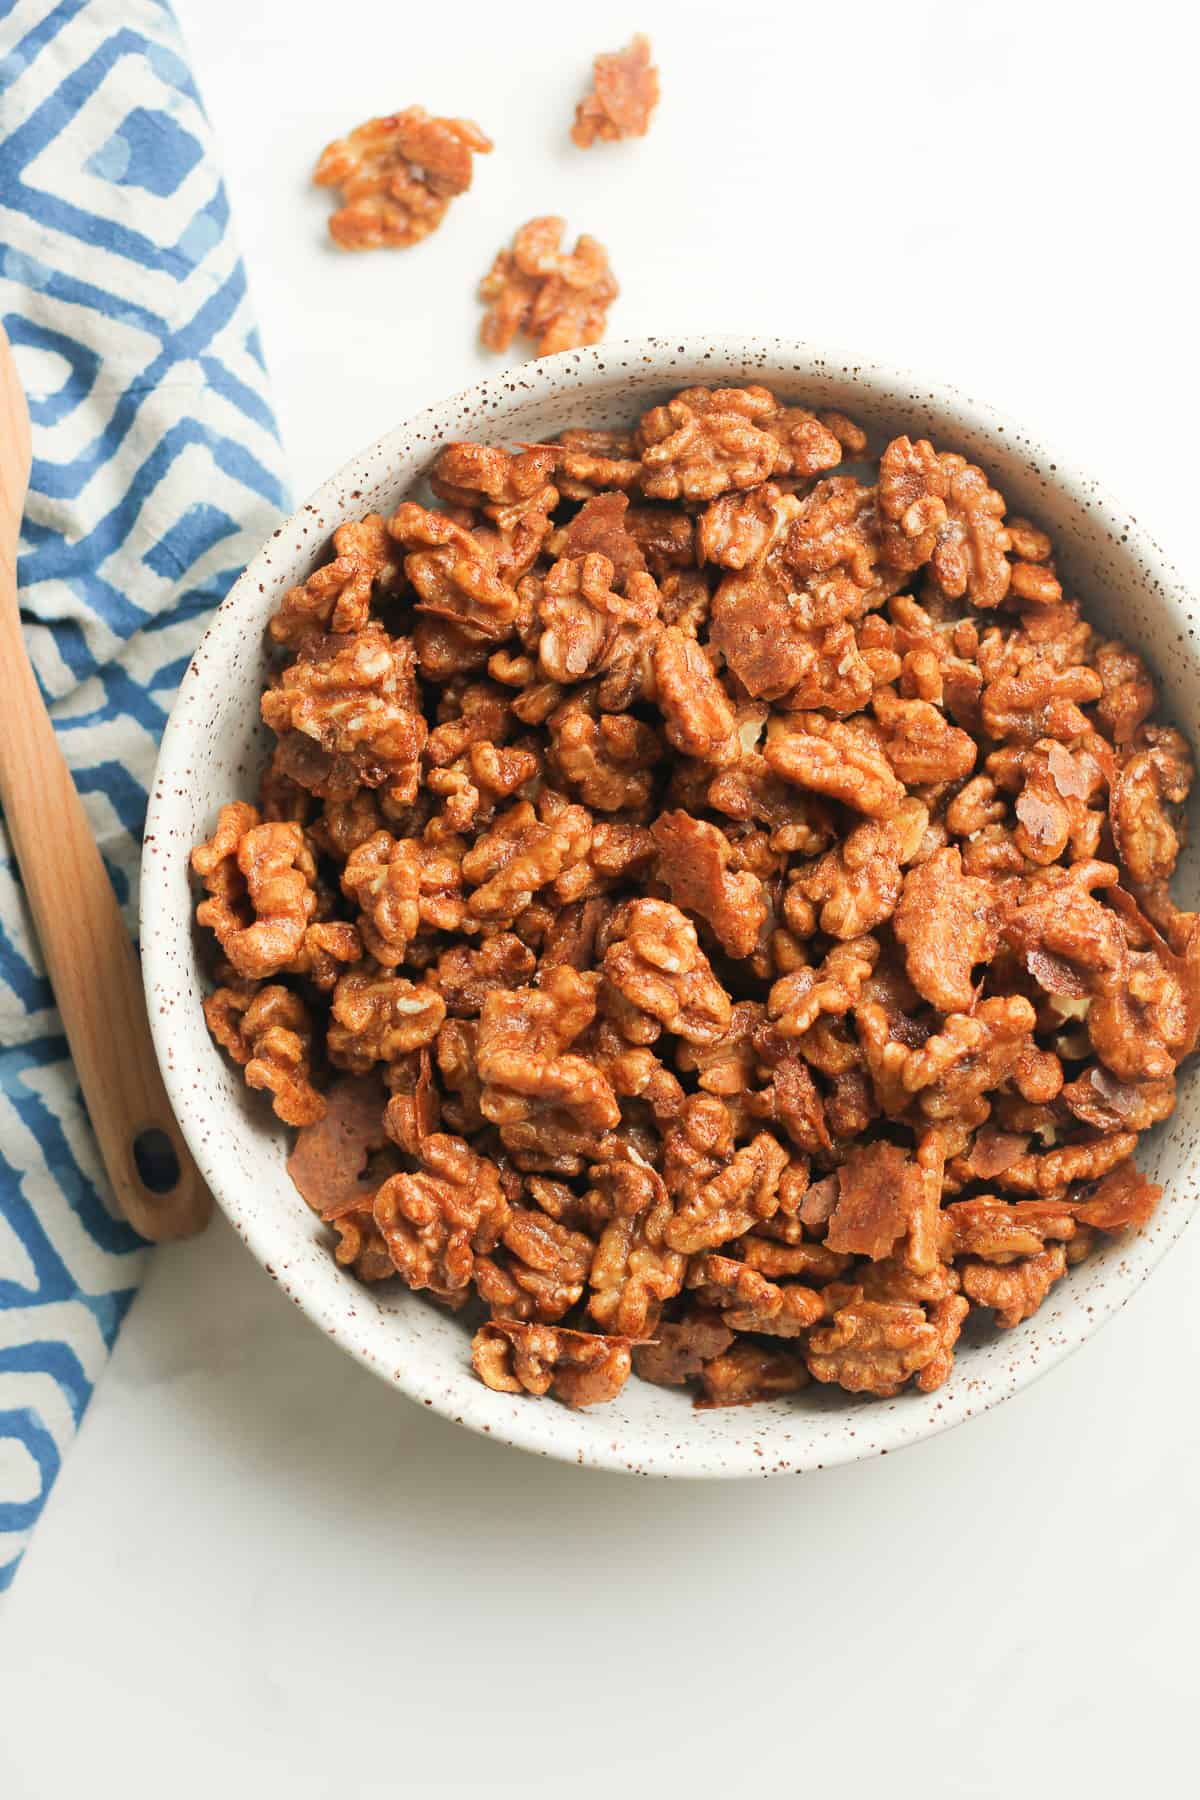 A bowl of the candied walnuts.